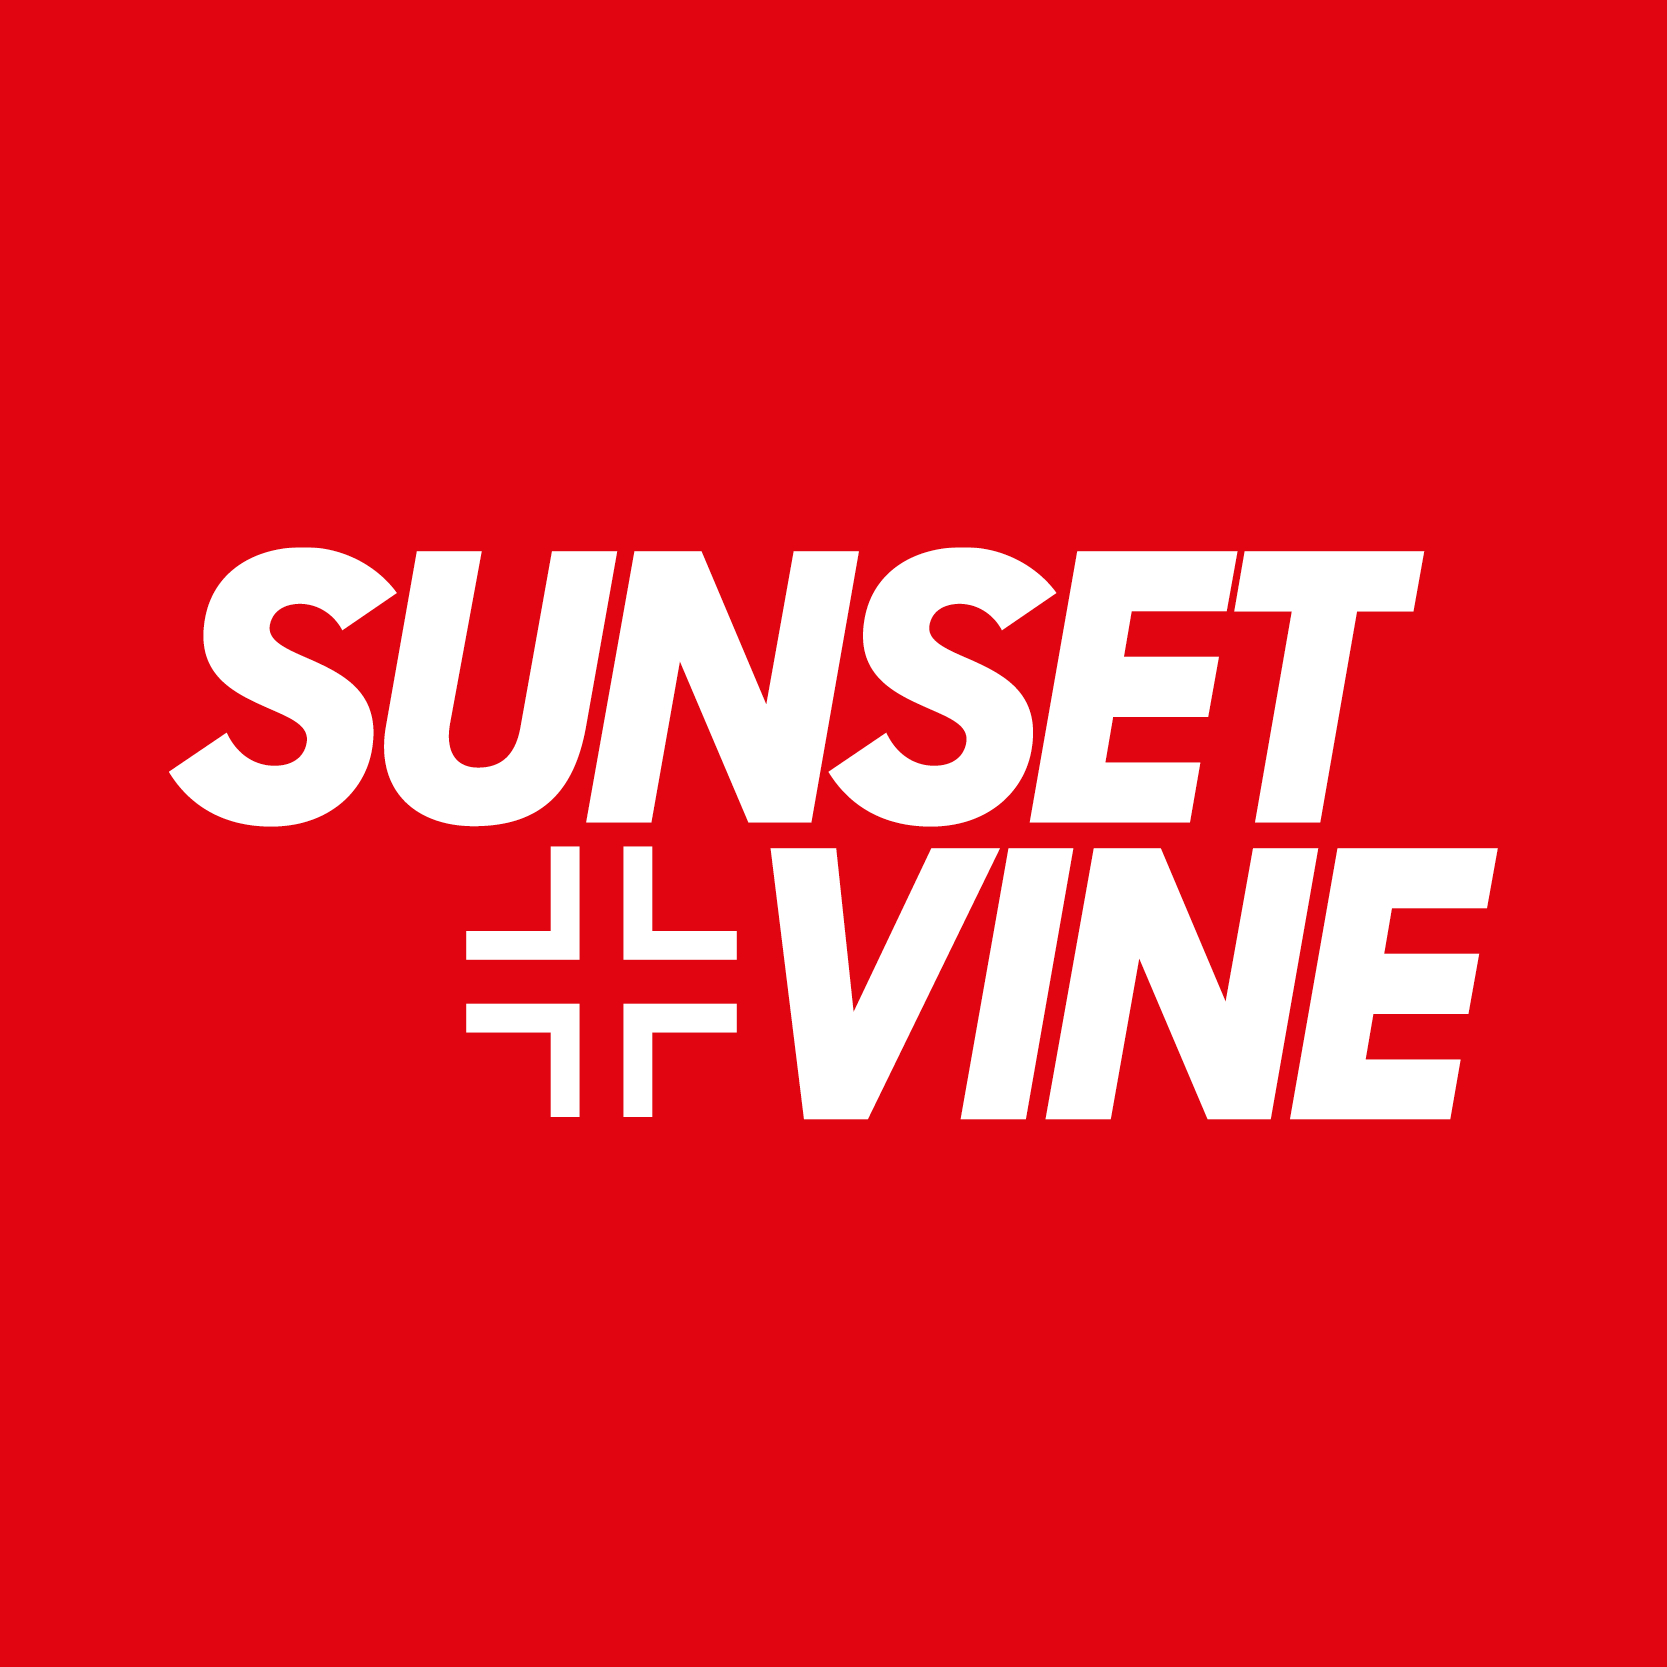 Sunset+Vine is to run the Host Broadcast Training Initiative around Birmingham 2022 ©Getty Images 